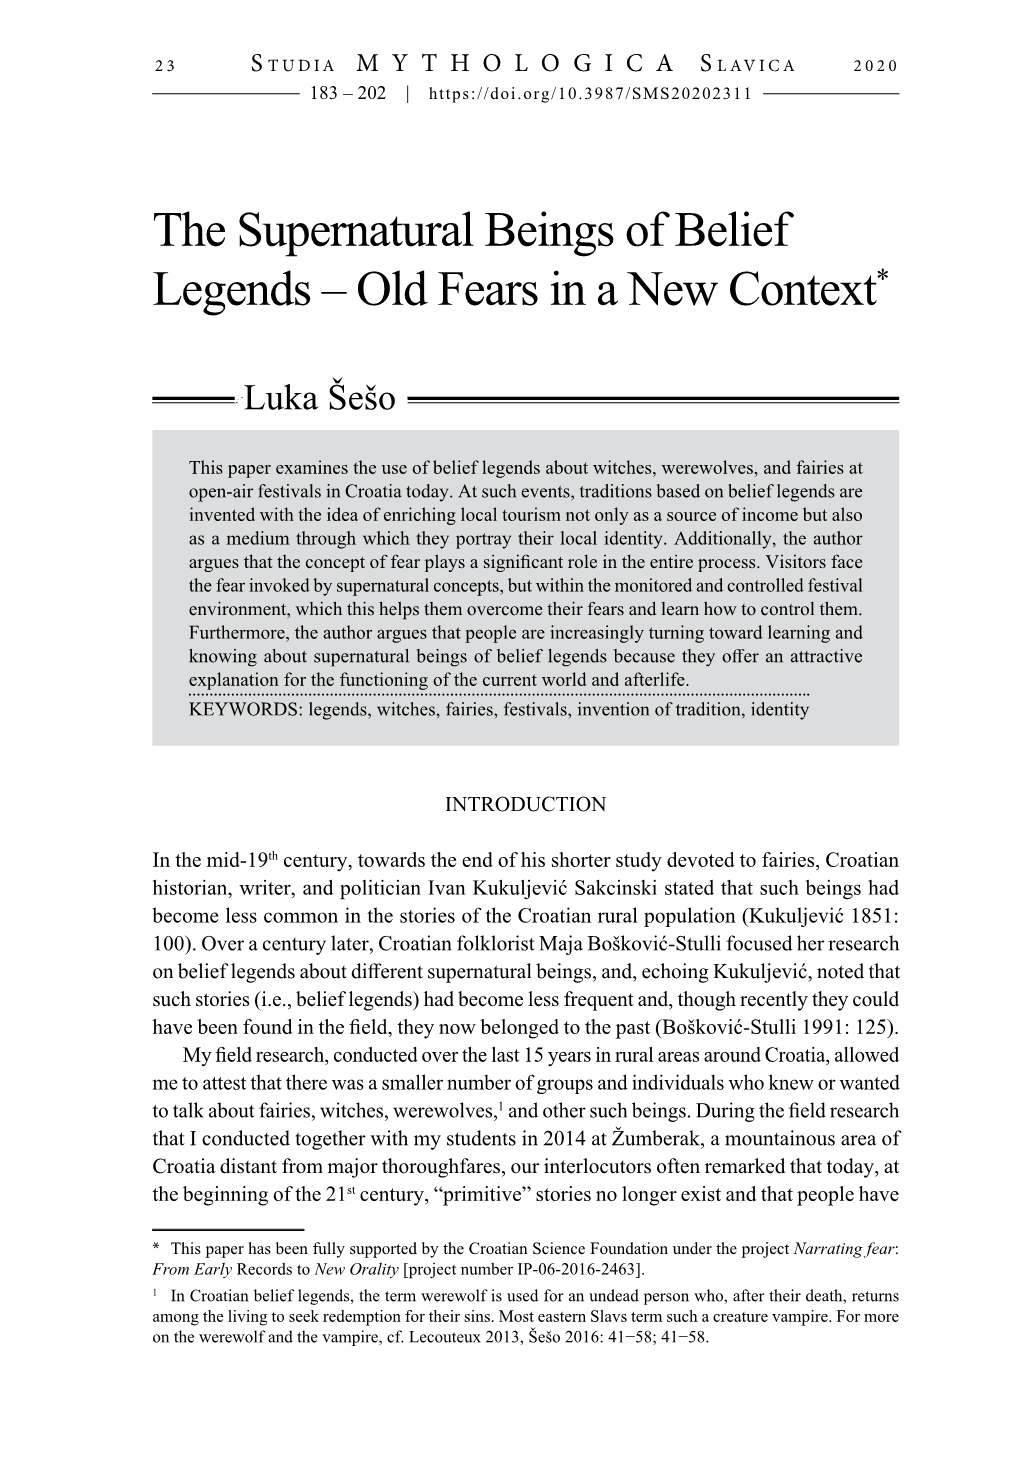 The Supernatural Beings of Belief Legends – Old Fears in a New Context*